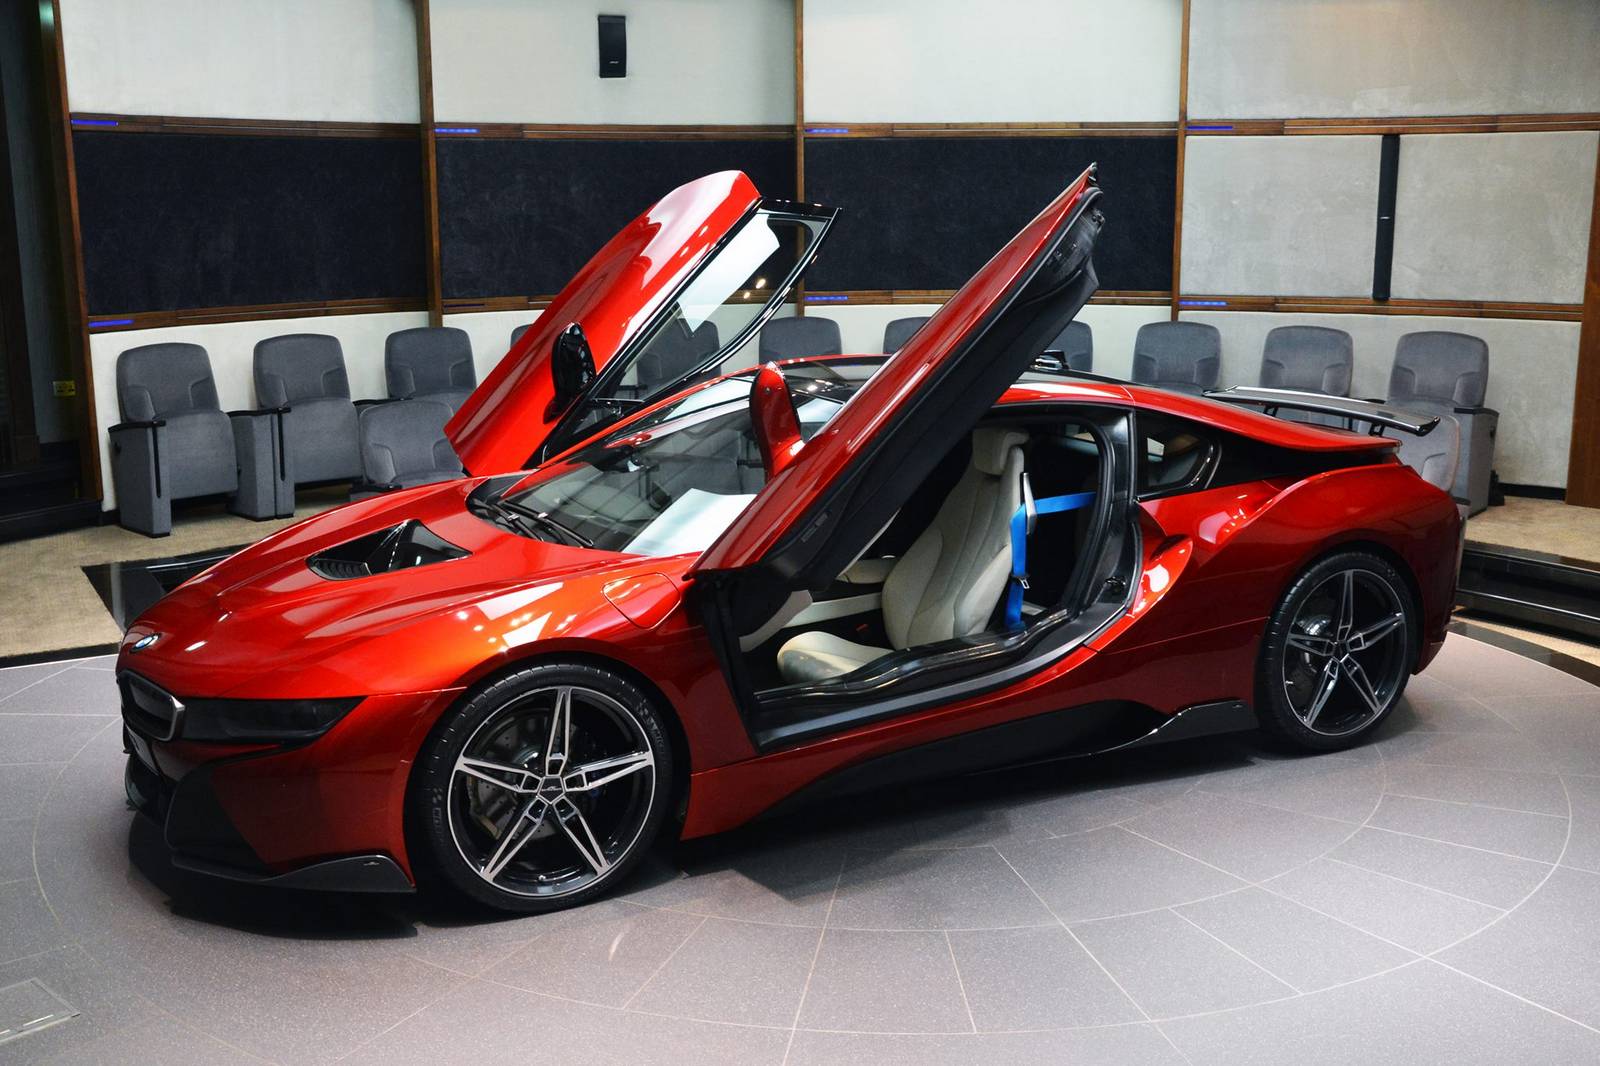 1 of 1 Lava Red BMW i8 Built for Princess Al Hawi in Abu